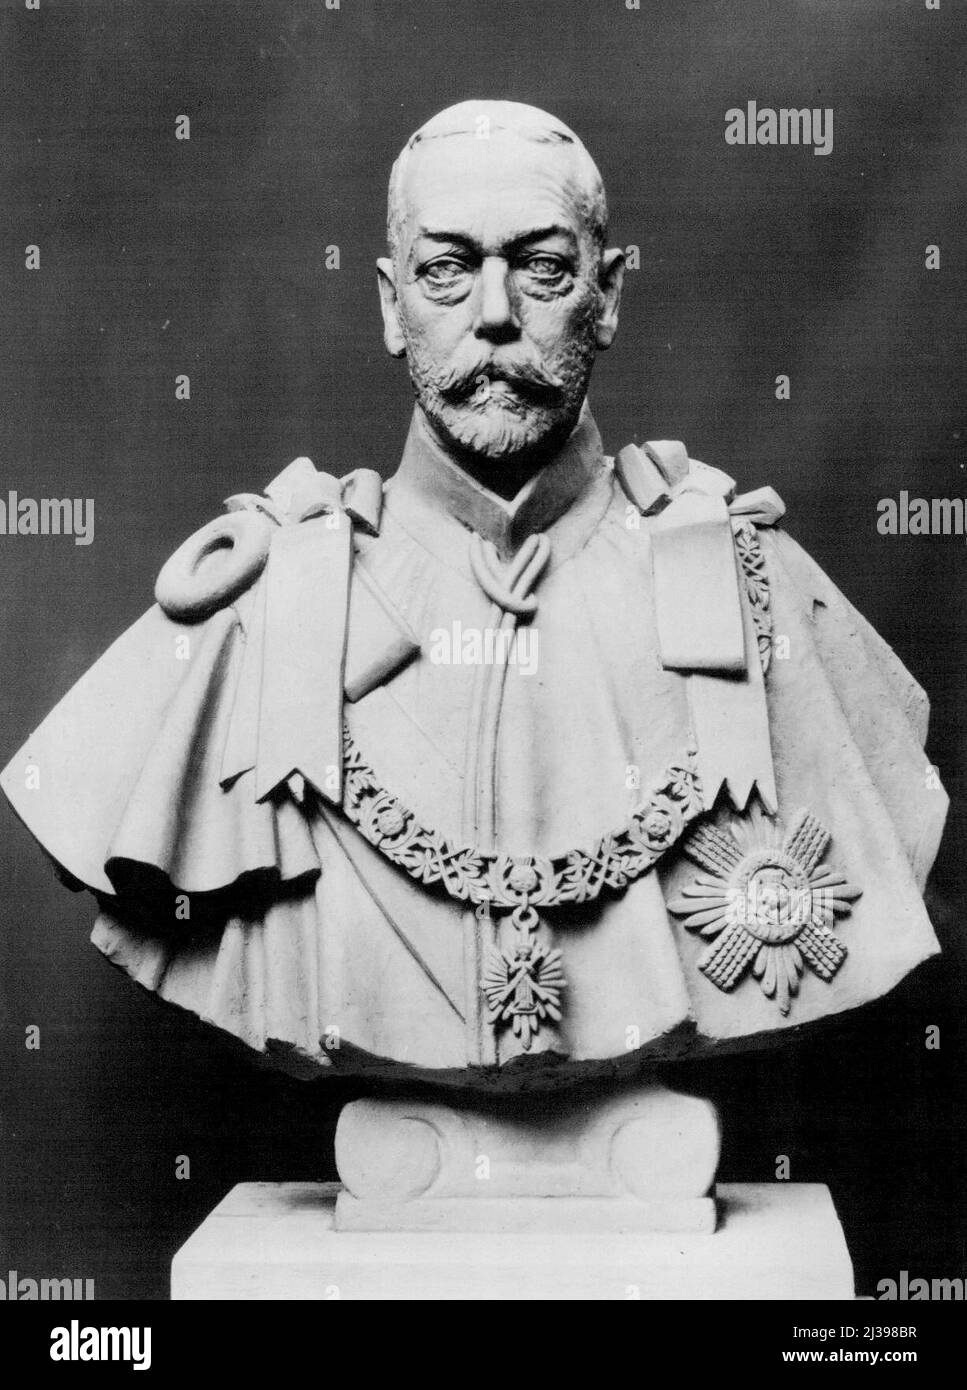 To Be Unveiled by King George VI. The bust of the late King George V., by Sir William Reid, K.C.V.O., which is to be unveiled at Crathie Church, Scotland, by H.M.King George VI to-morrow. August 27, 1938. (Photo by Topical Press). Stock Photo